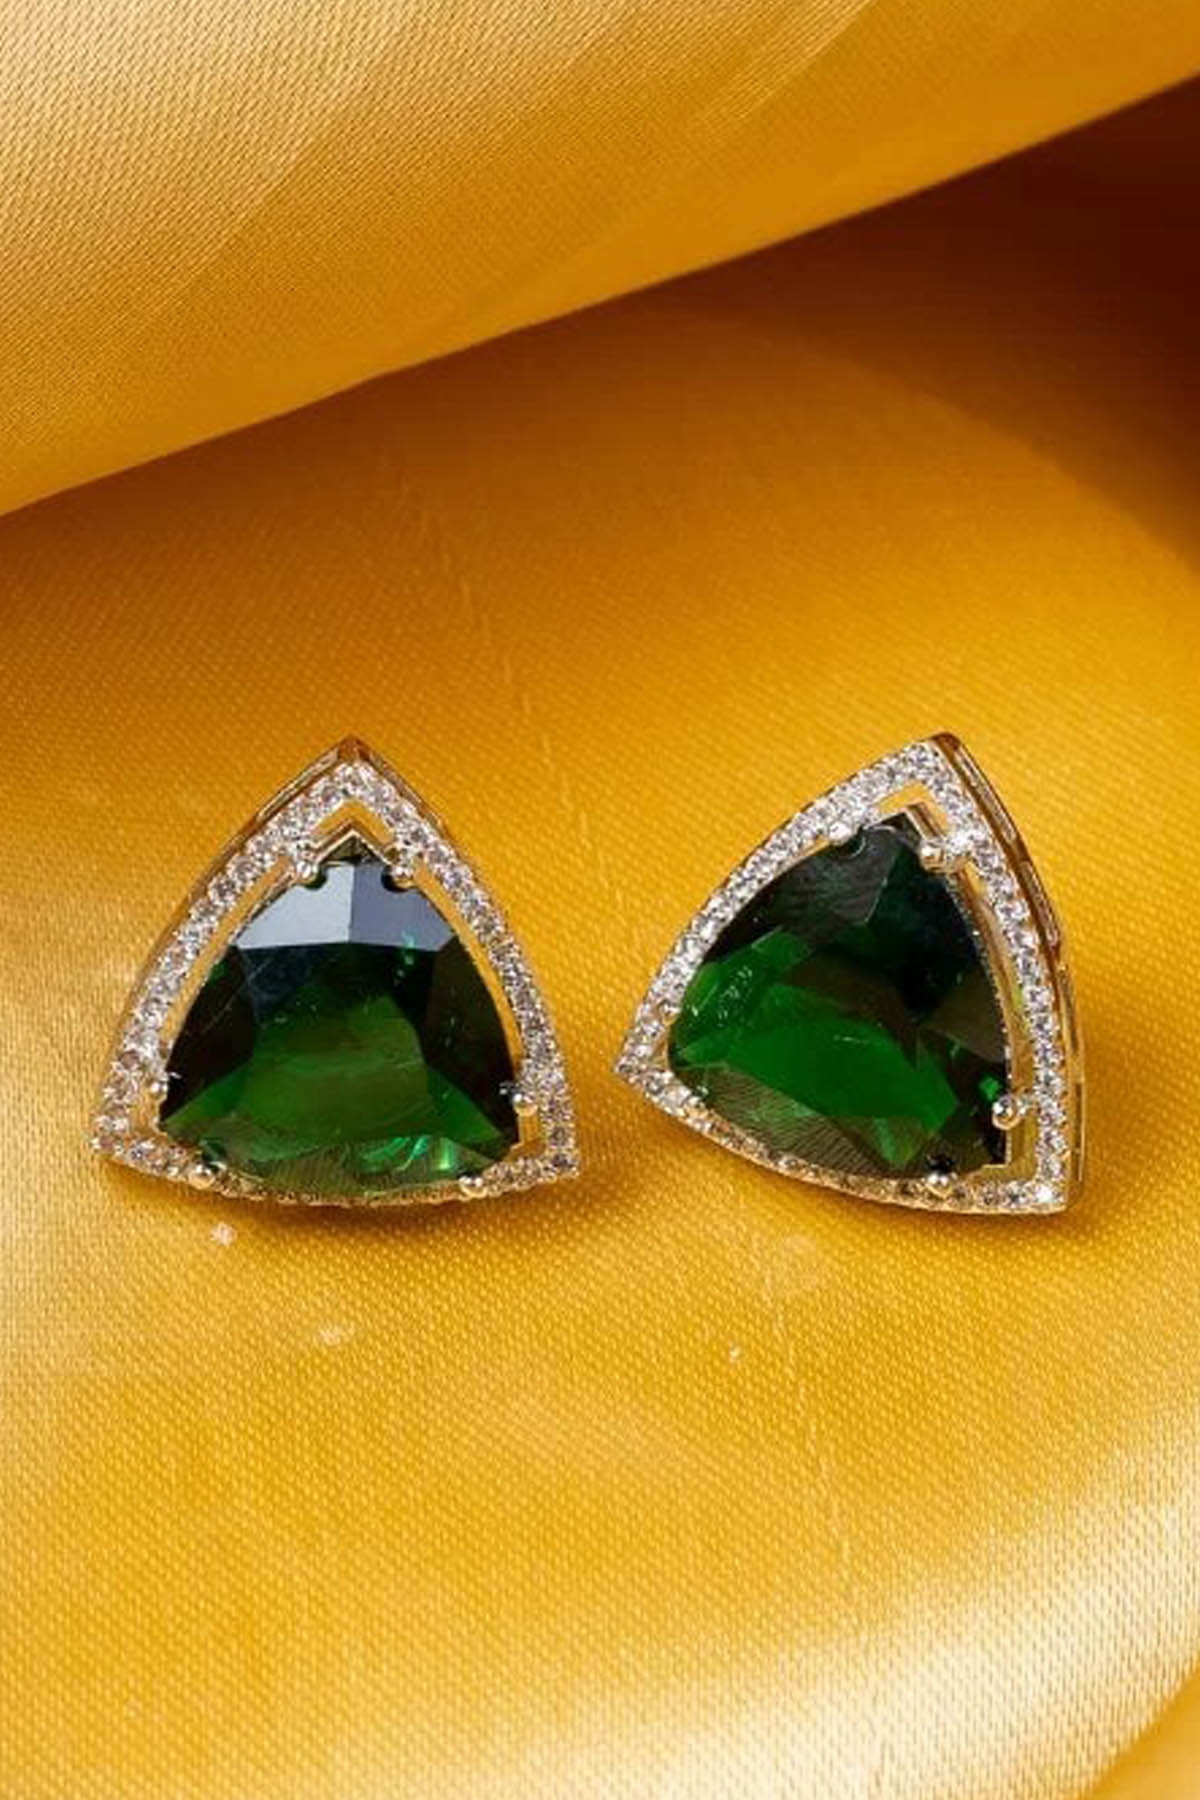 Green Triangle Diamond Studs of Brand Putstyle Available online at ScrollnShops